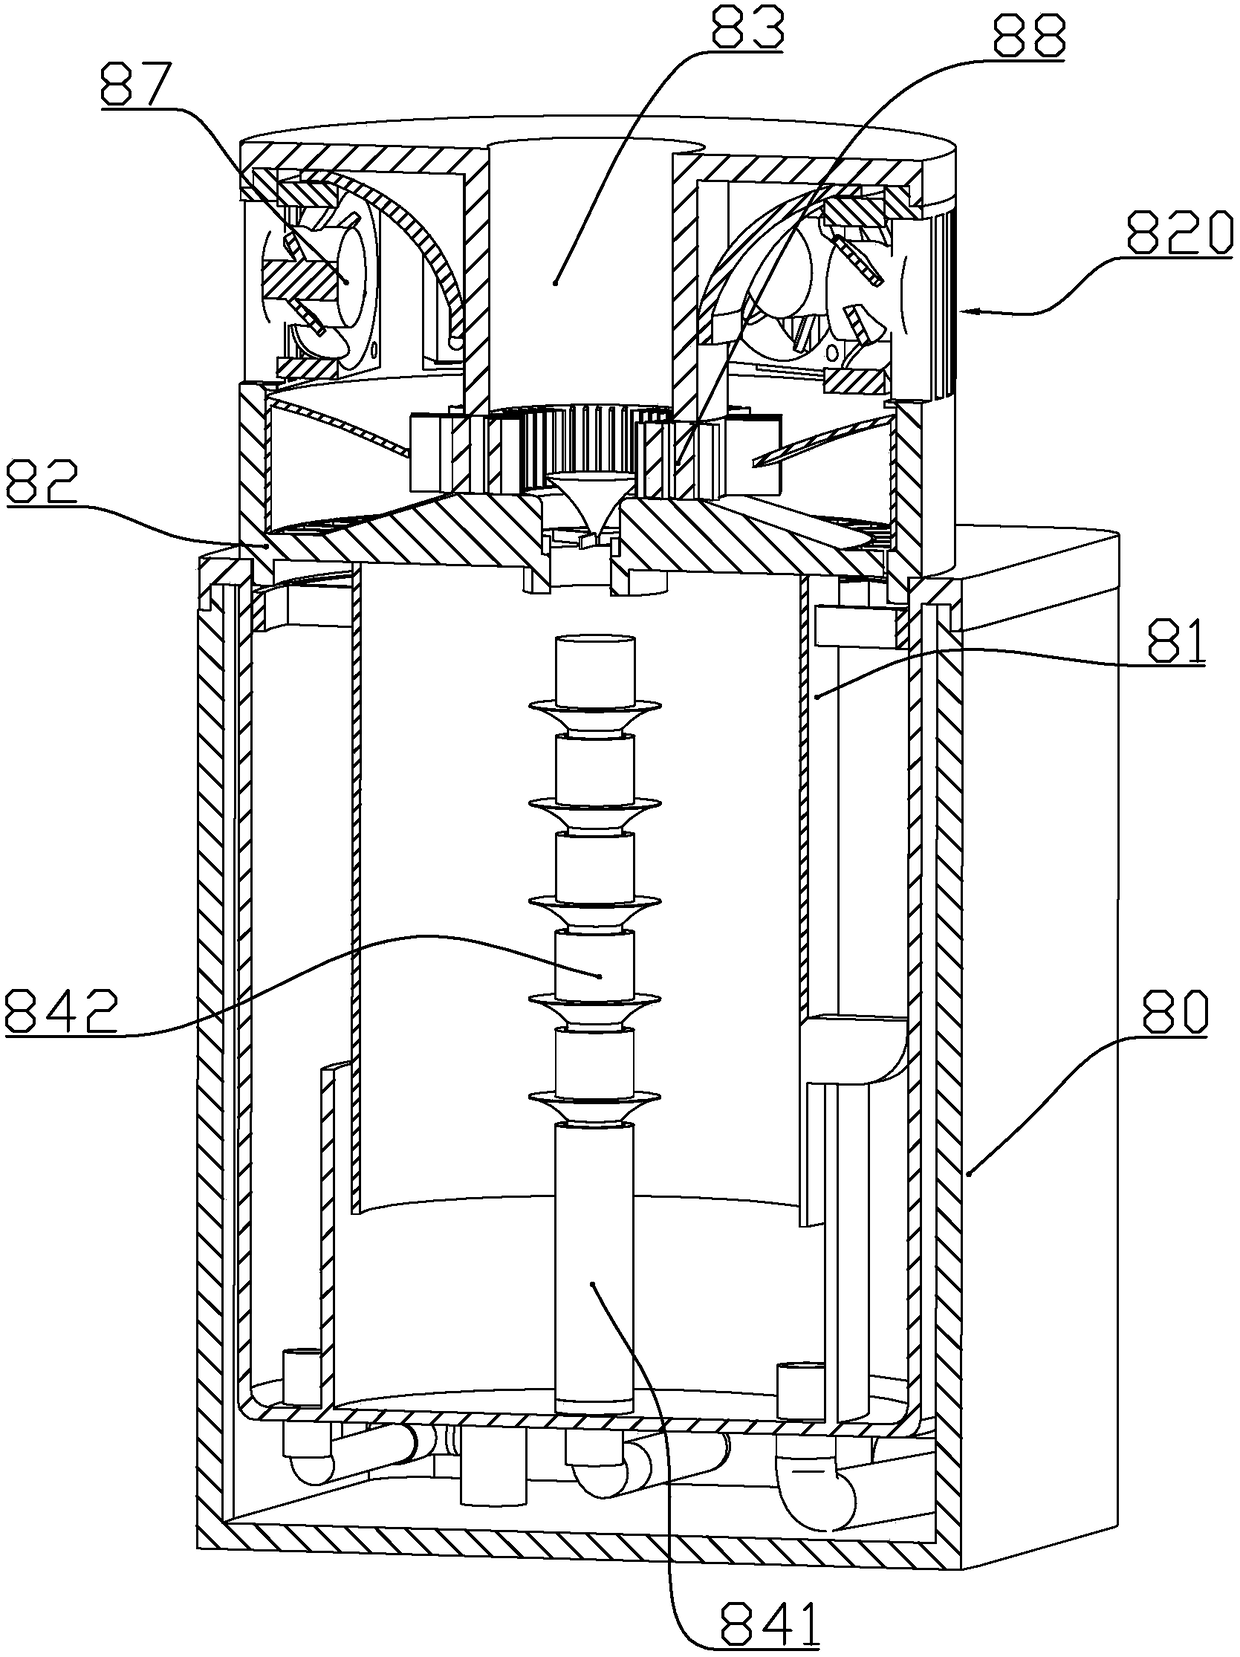 A water curtain forming device